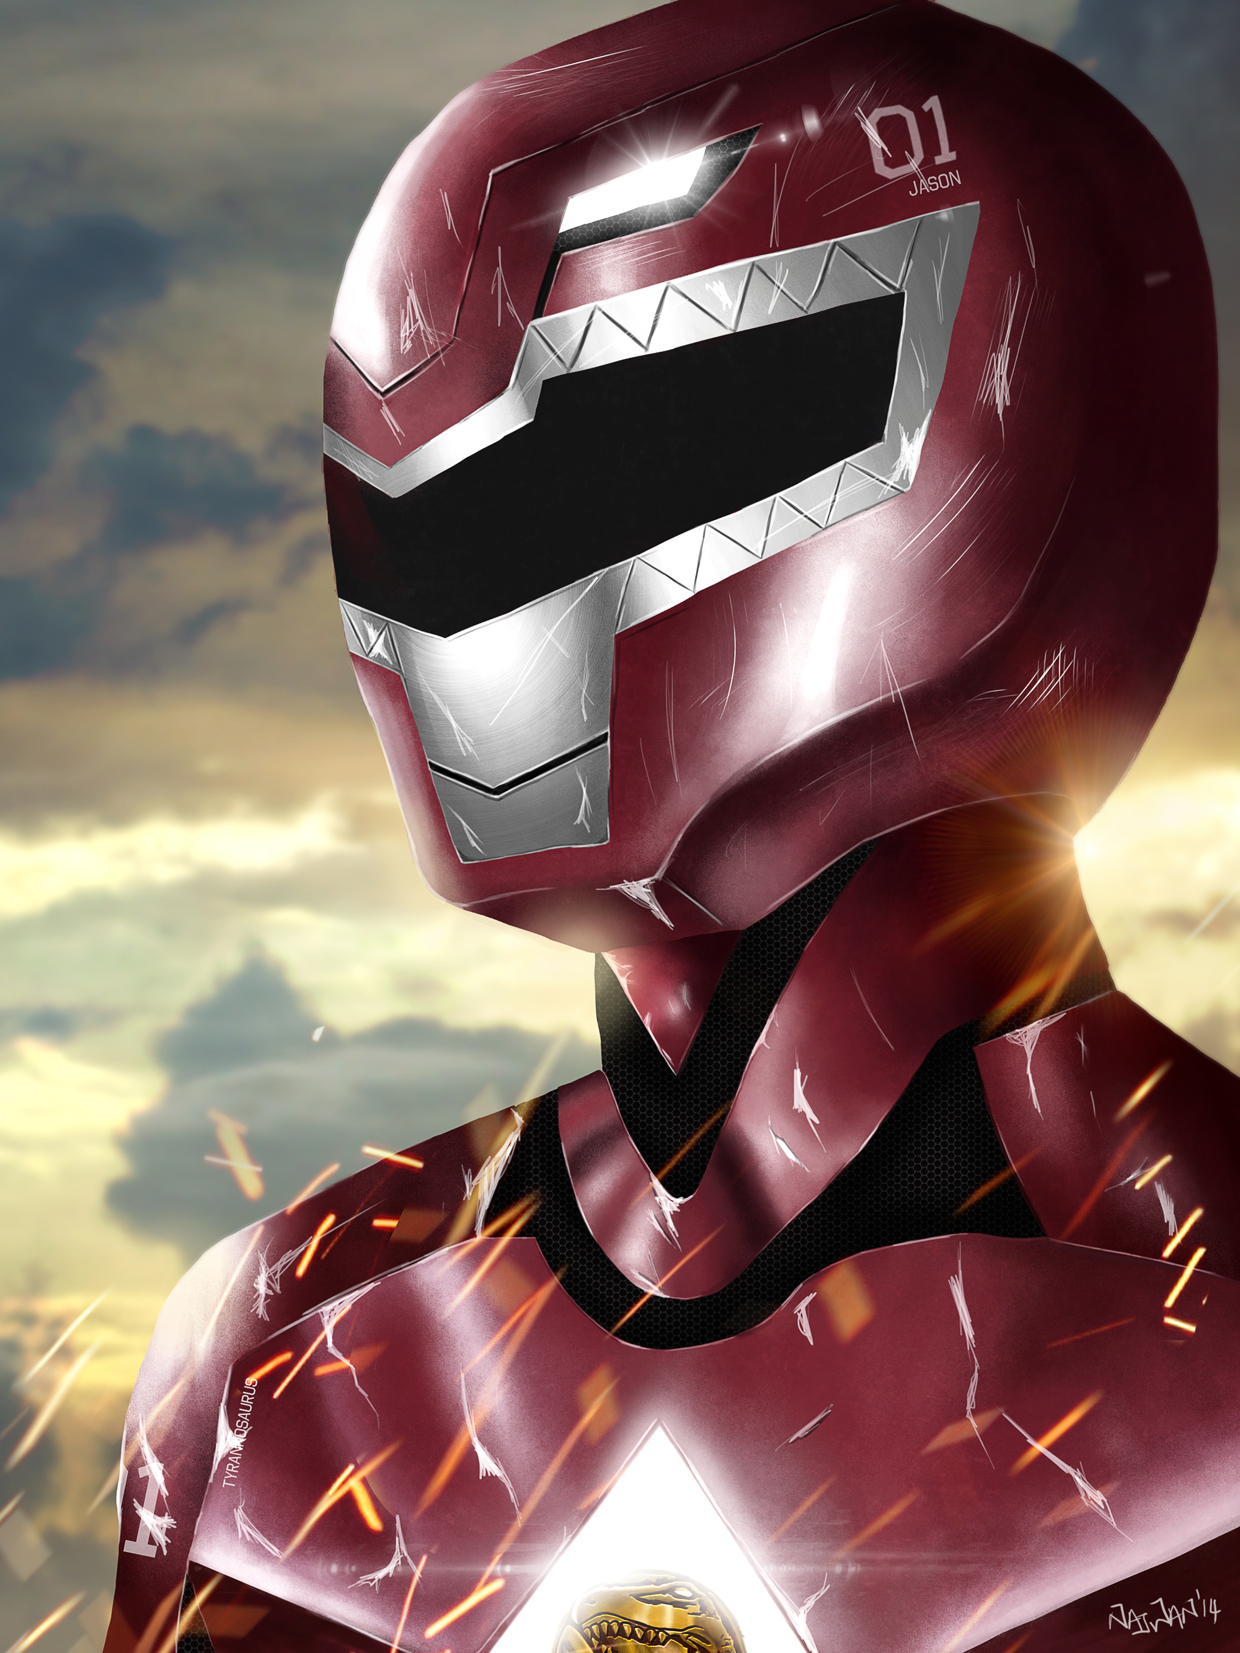 Could Theo James be the next Red Power Ranger?